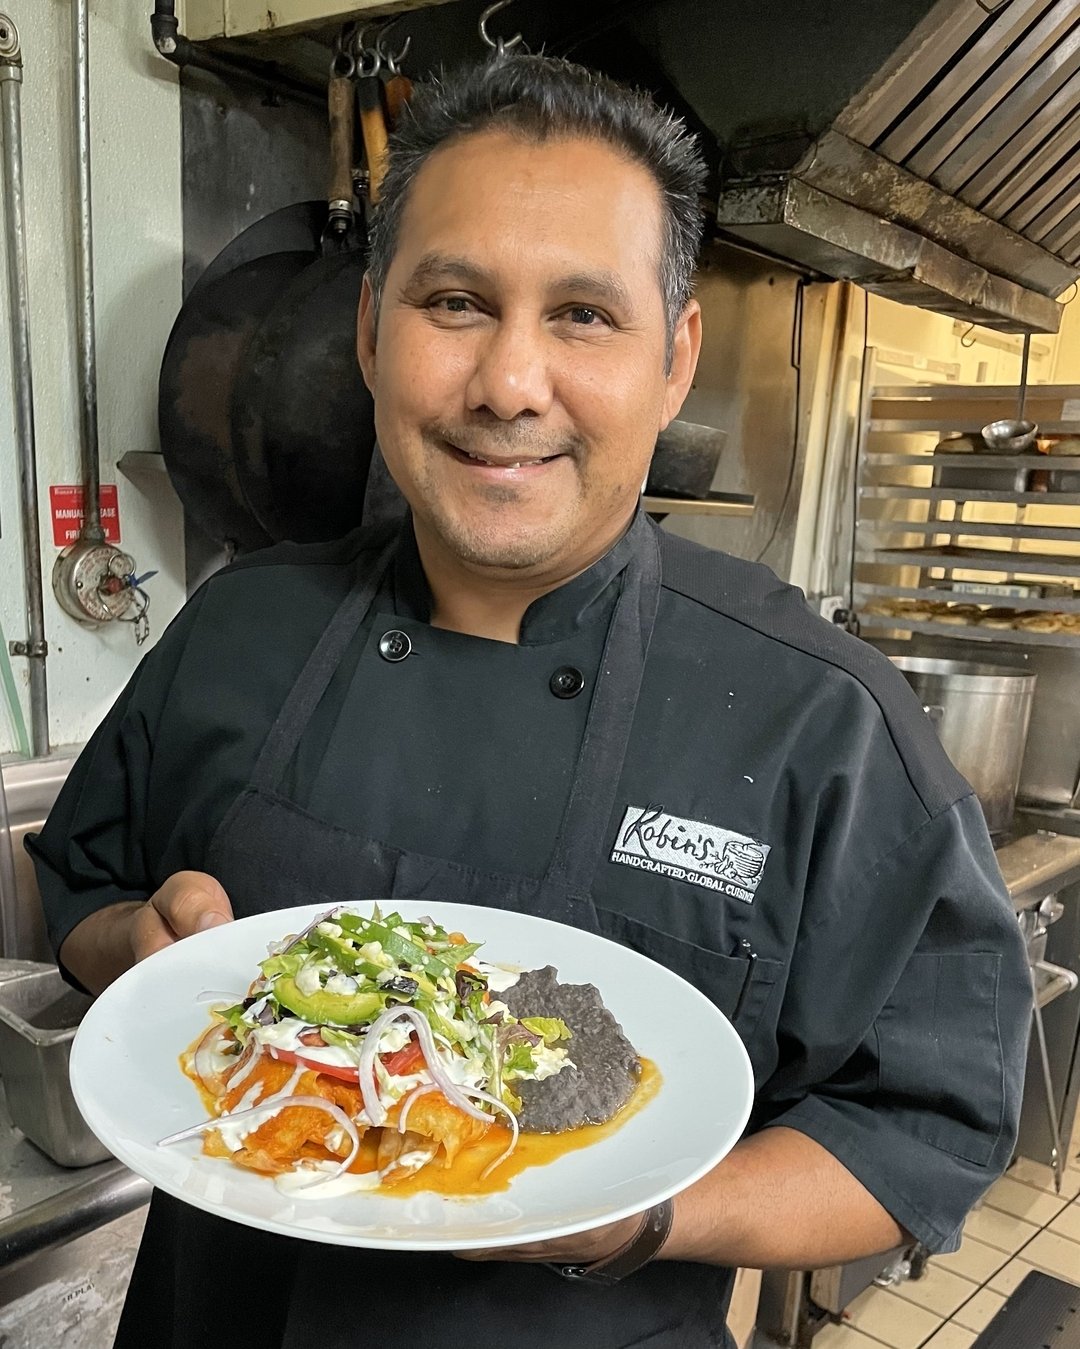 Oliver, our kitchen manager &amp; lead prep cook, has been with Robin&rsquo;s for 17 years. This guy cooks up some delicious staff meals! This year, we've asked him to make one of Shanny's favorites: pork chili verde with Spanish rice, beans &amp; to